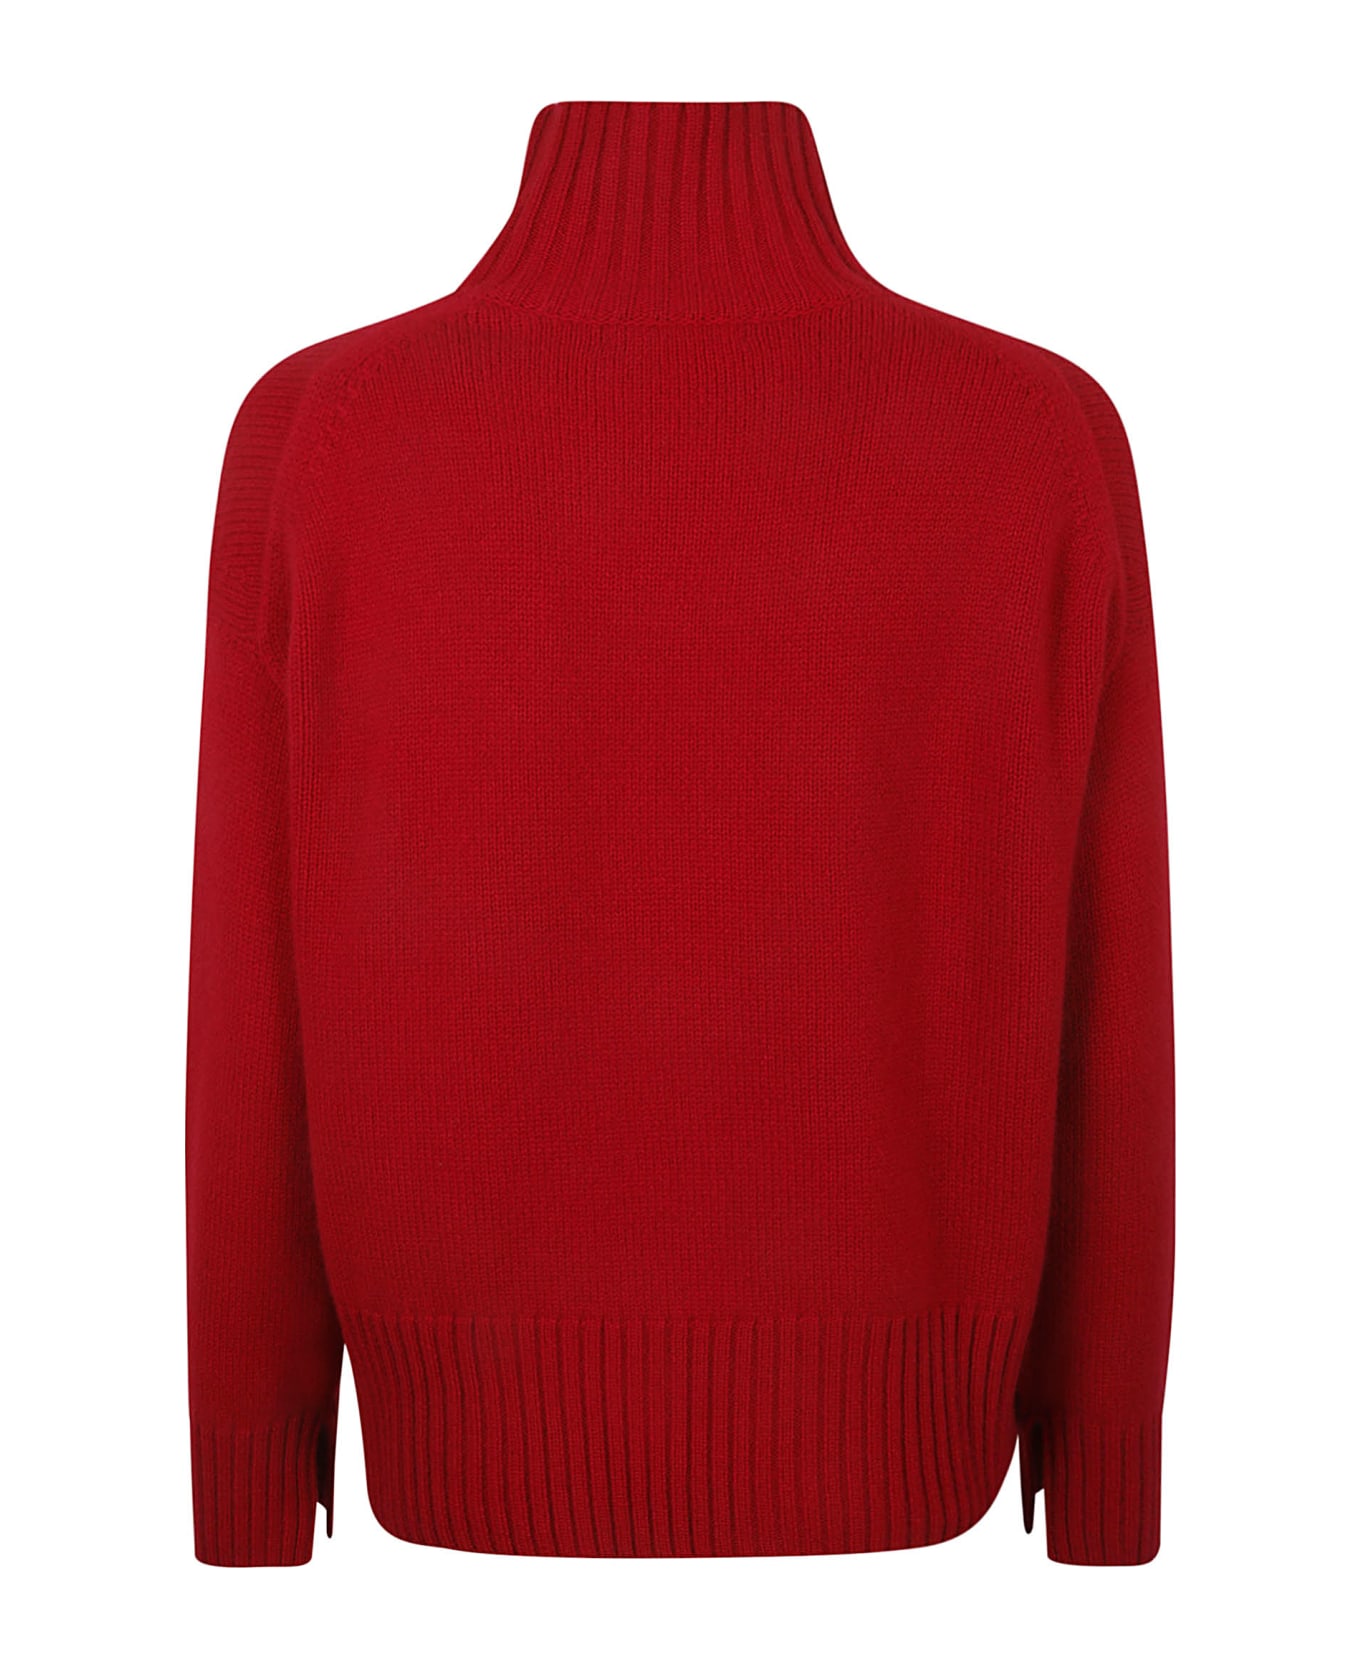 Be You Ribbed Neck Sweater - Red Lipstick